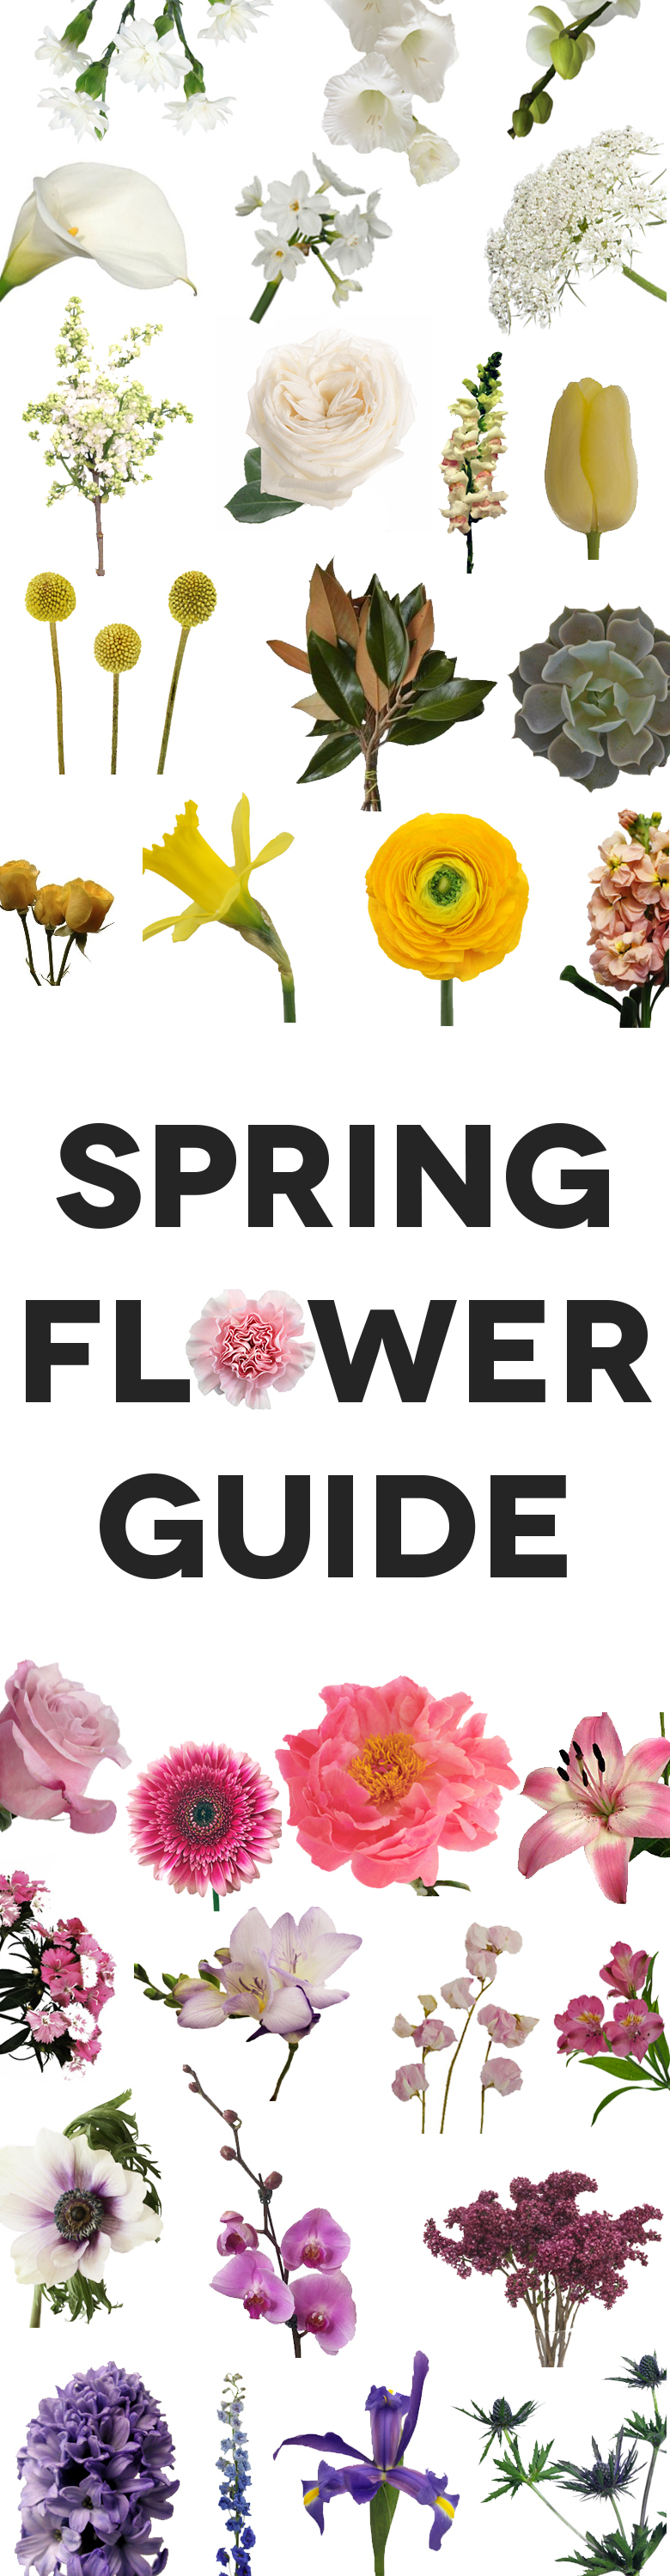 Spring Flowers: The Complete Guide | A Practical Wedding